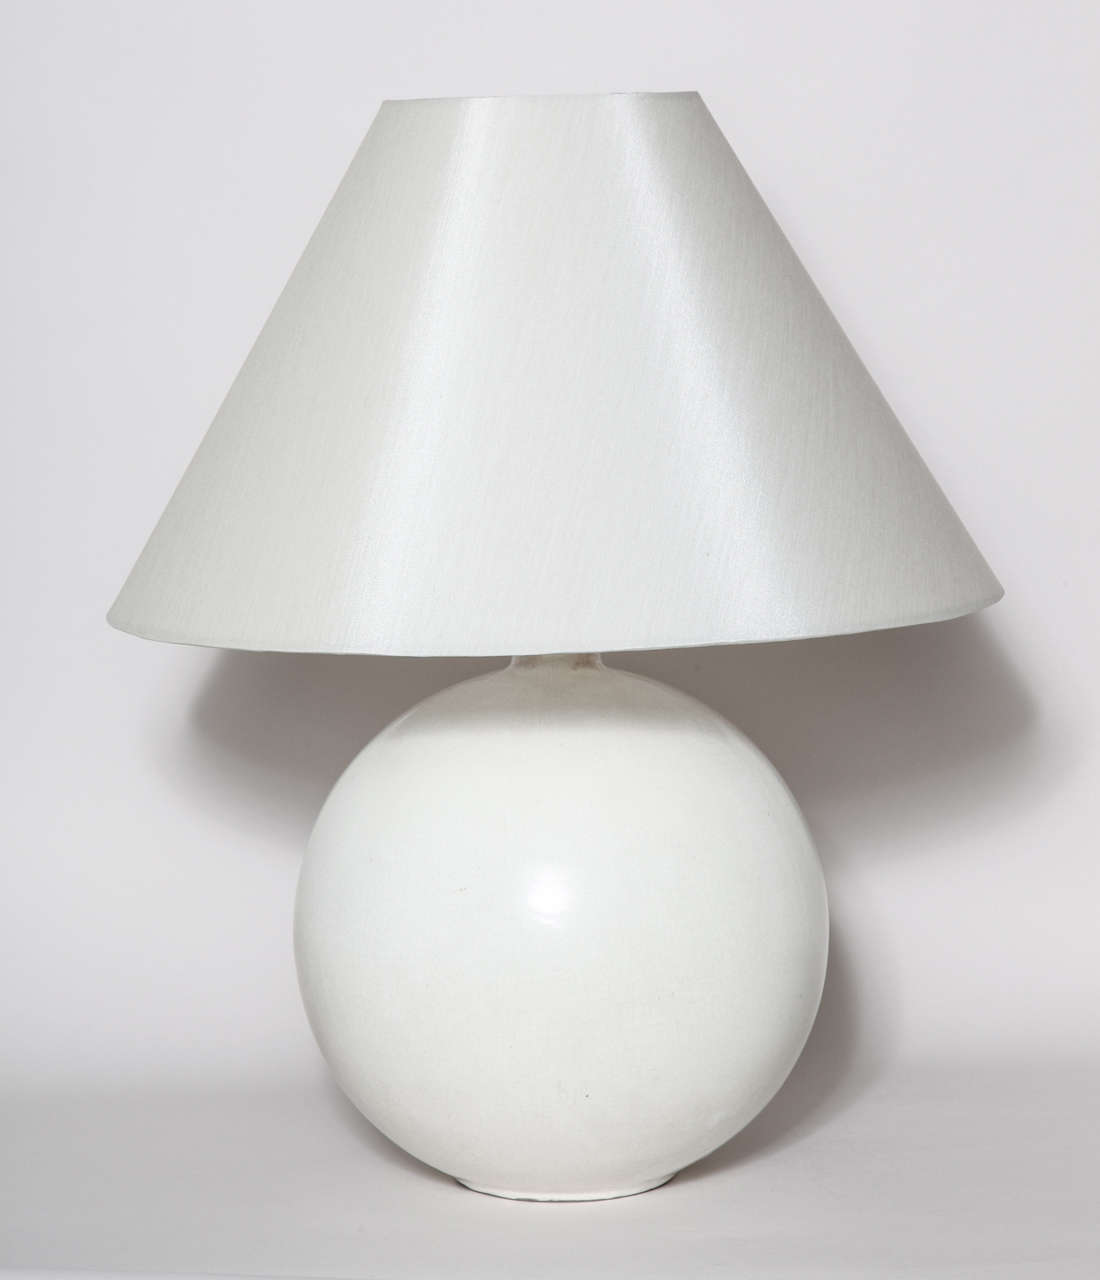 This important lamp base is spherical on a heel and with a short cylindrical neck with white craqueleur enamel.
Has been rewired to U.S. standards.
Signed: 